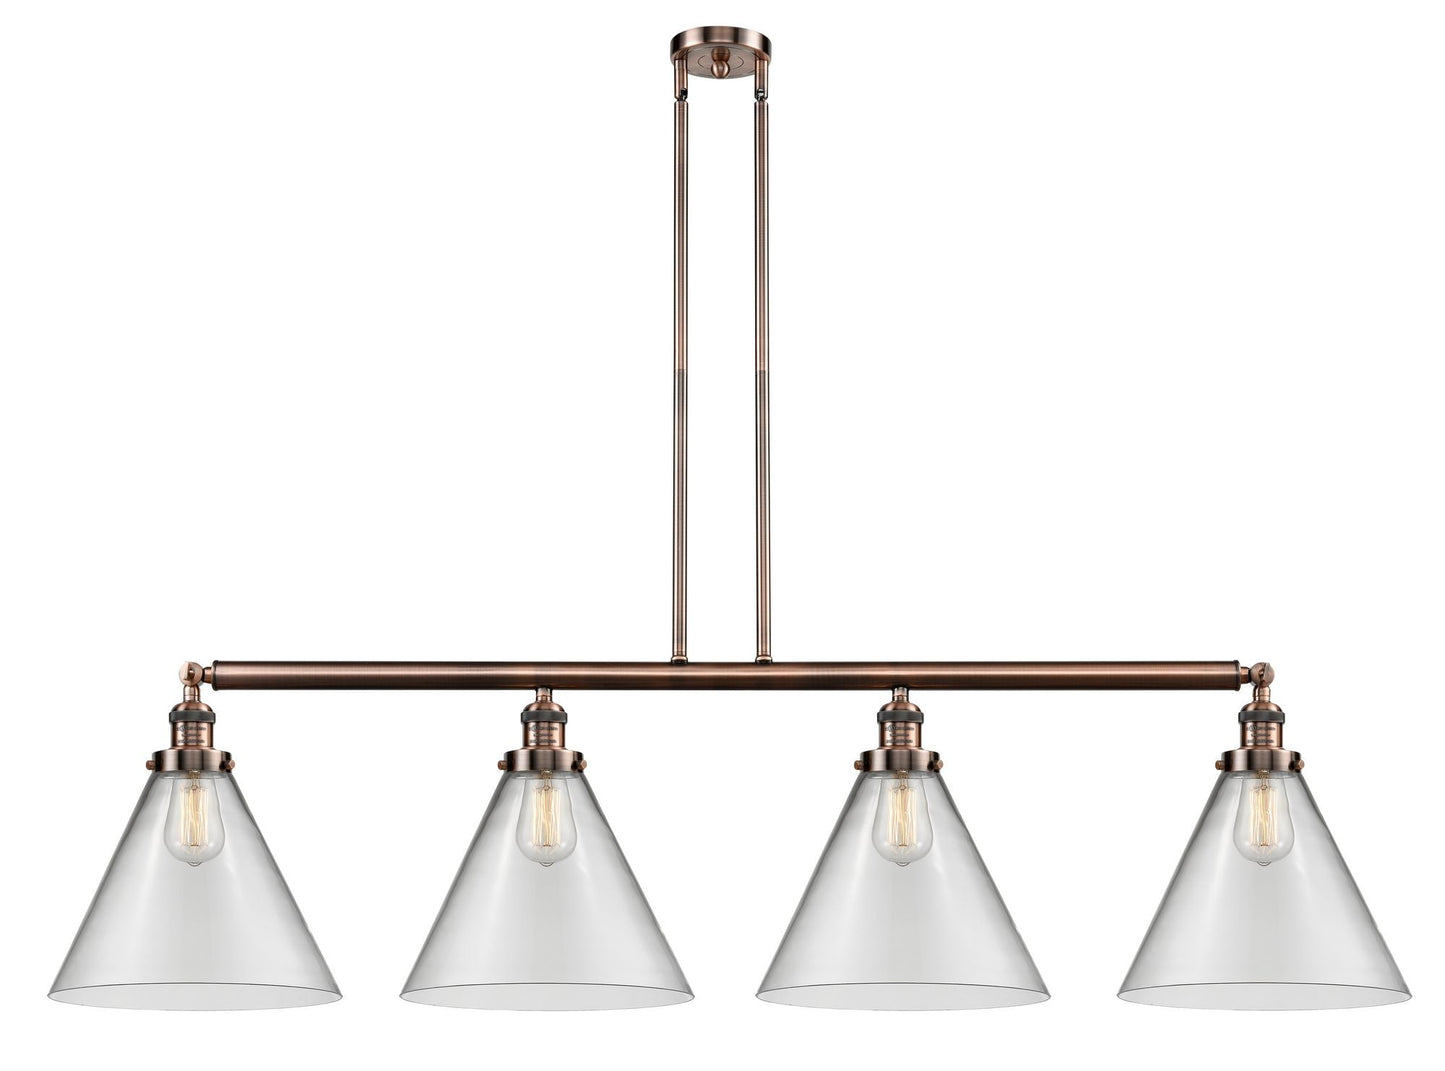 214-AC-G42-L 4-Light 56" Antique Copper Island Light - Clear Cone 12" Glass - LED Bulb - Dimmensions: 56 x 12 x 14<br>Minimum Height : 24.25<br>Maximum Height : 48.25 - Sloped Ceiling Compatible: Yes